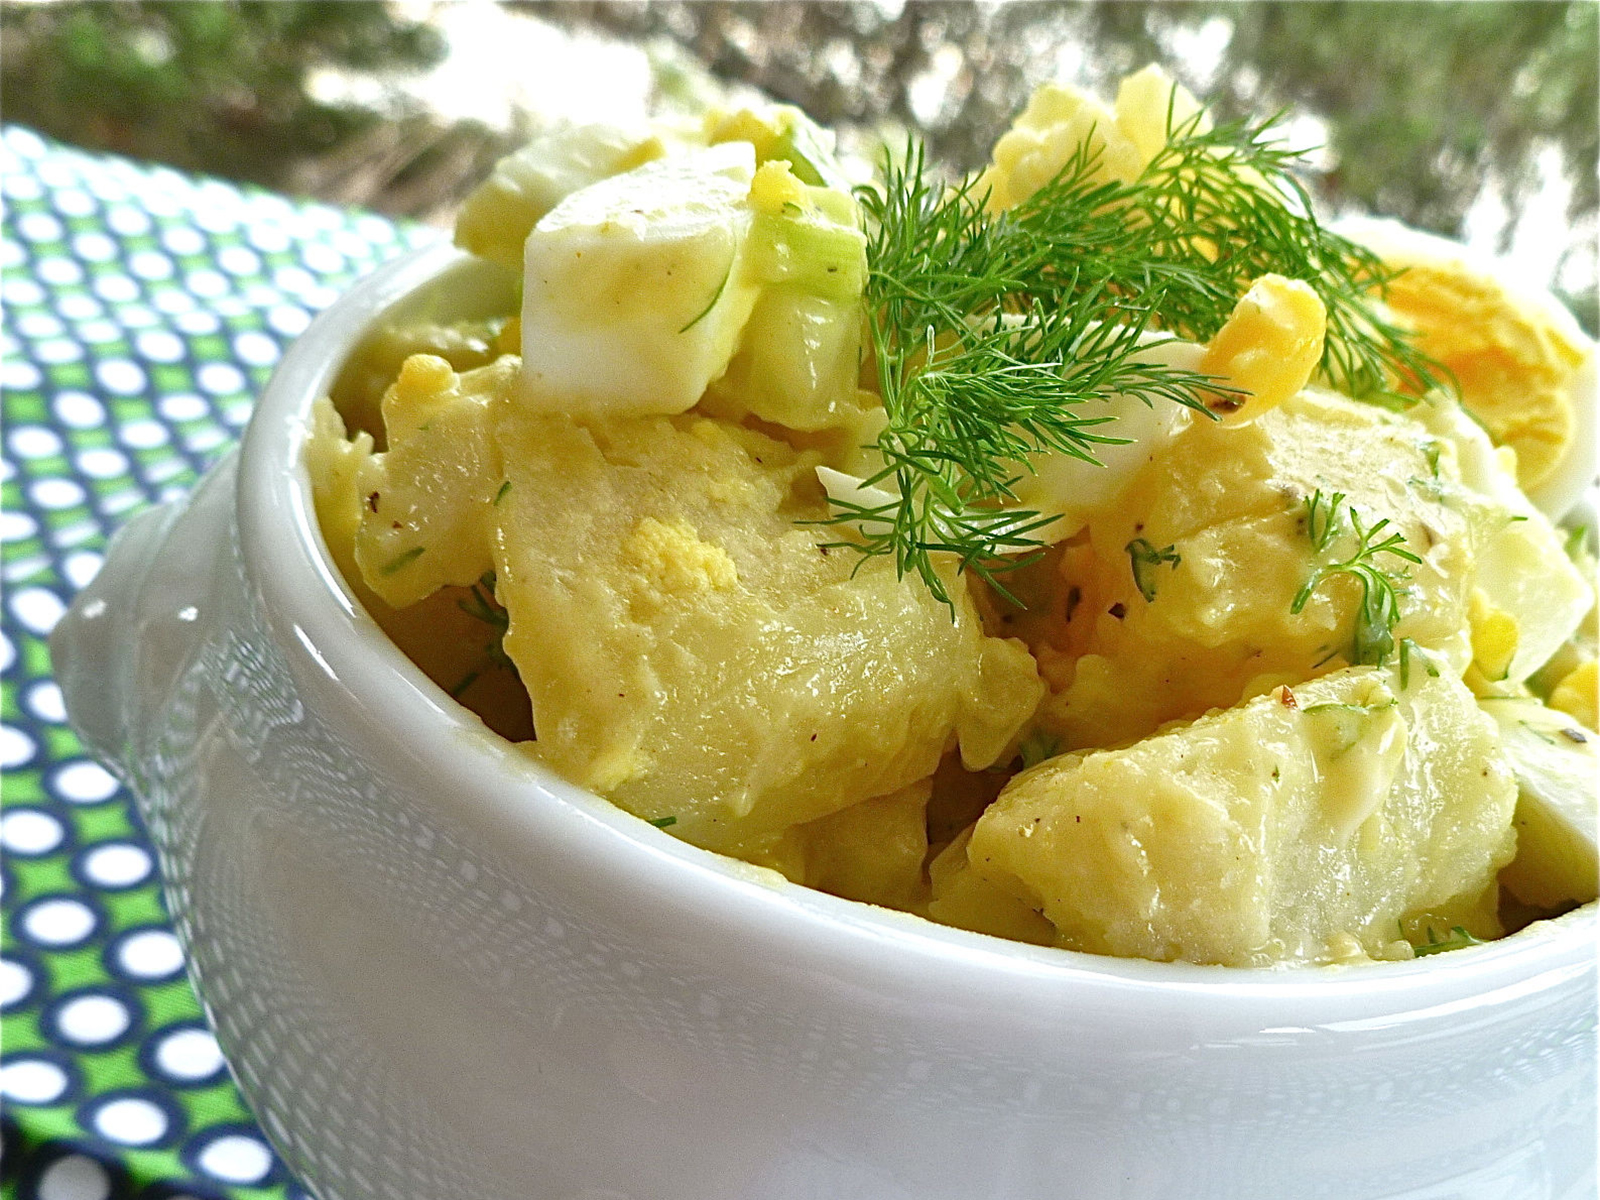 close up view of Potato Salad garnished with fresh dill in a bowl